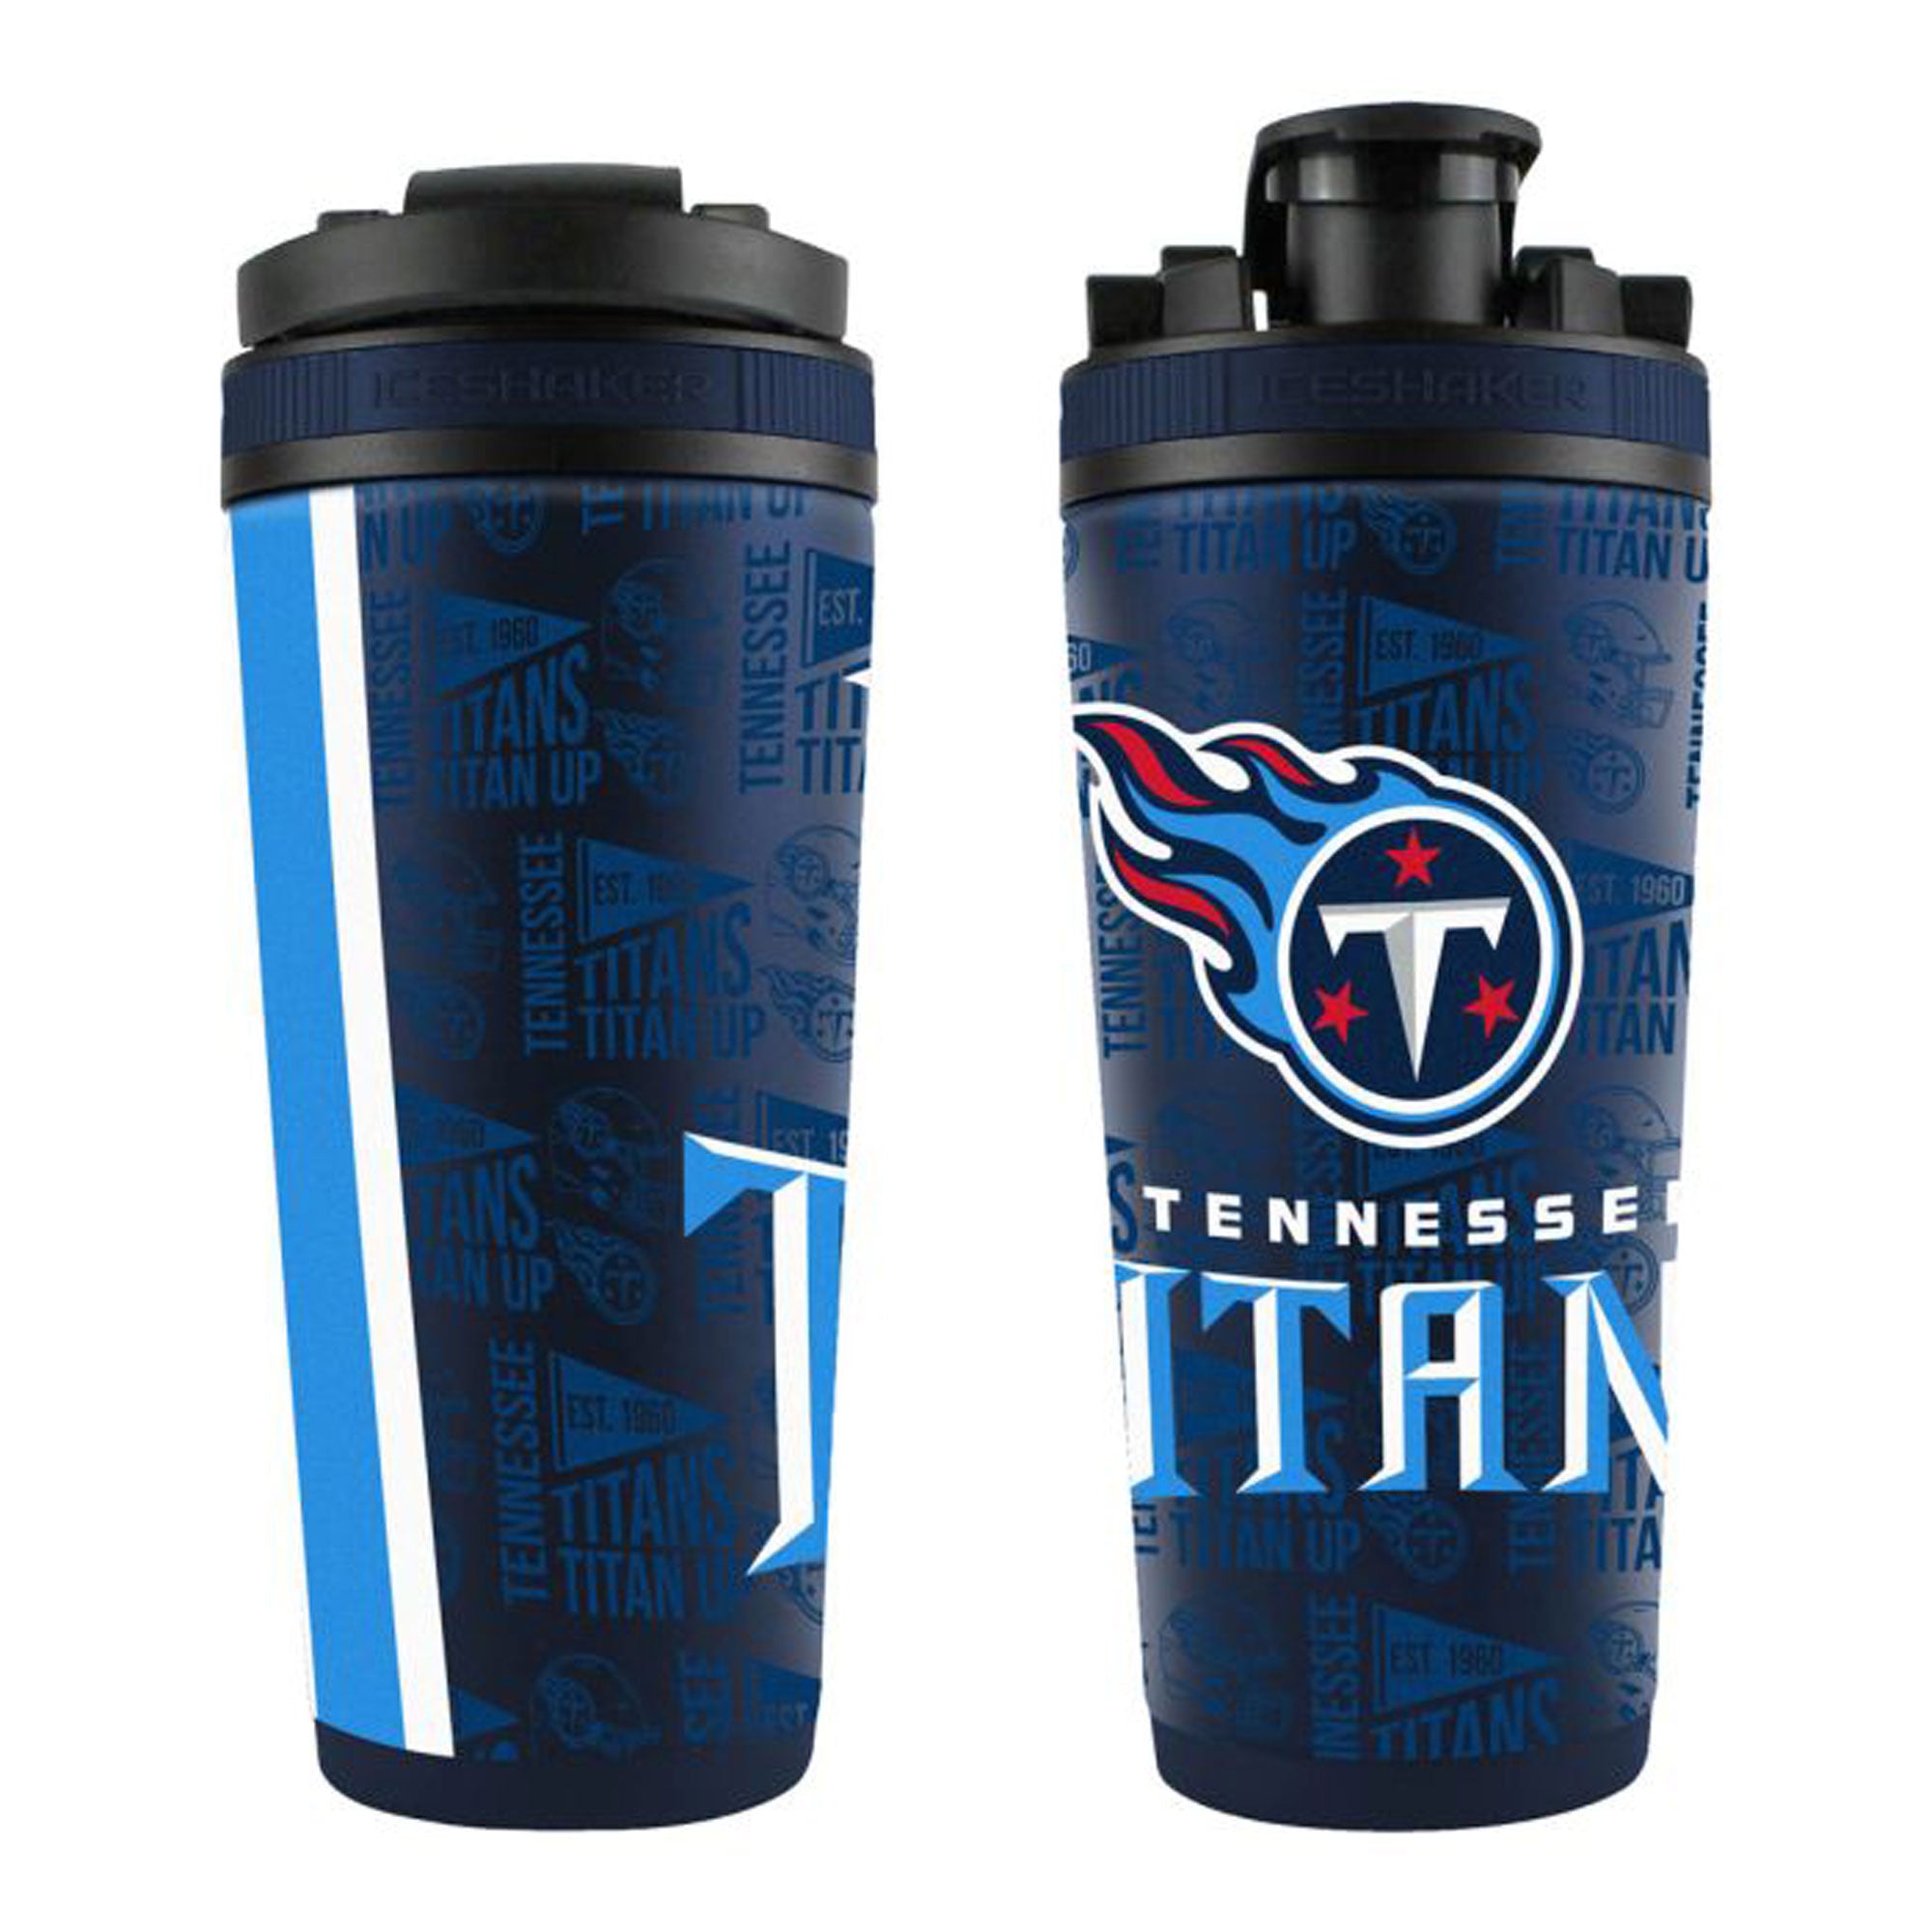 Officially Licensed Tennessee Titans 4D Ice Shaker